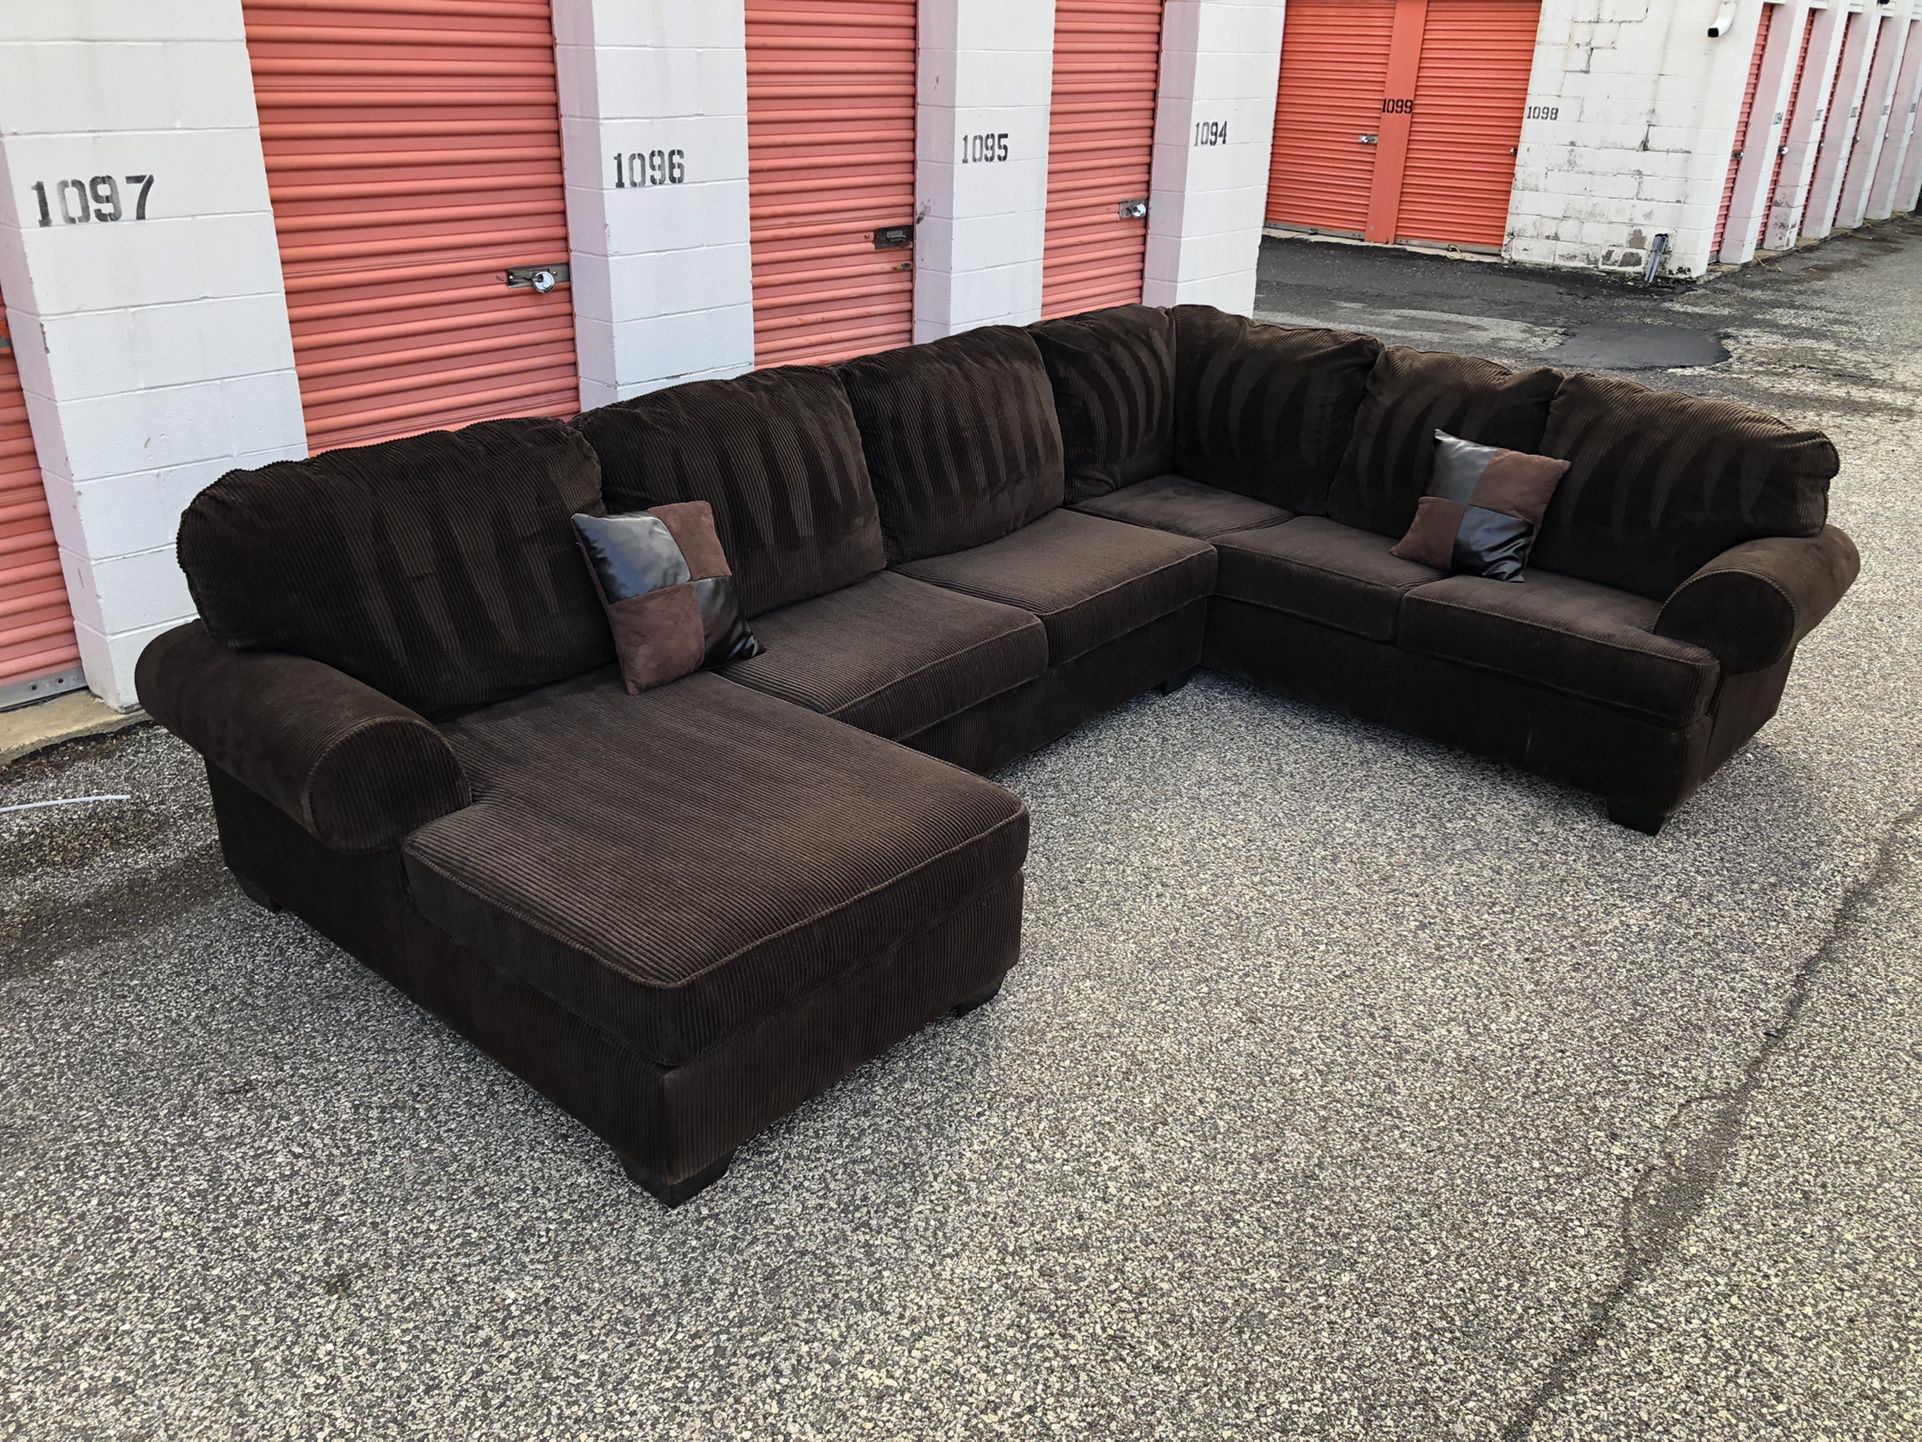 FREE DELIVERY - Ashely Big Double Sectional Dark Brown Couch - Look My Profile For More Options